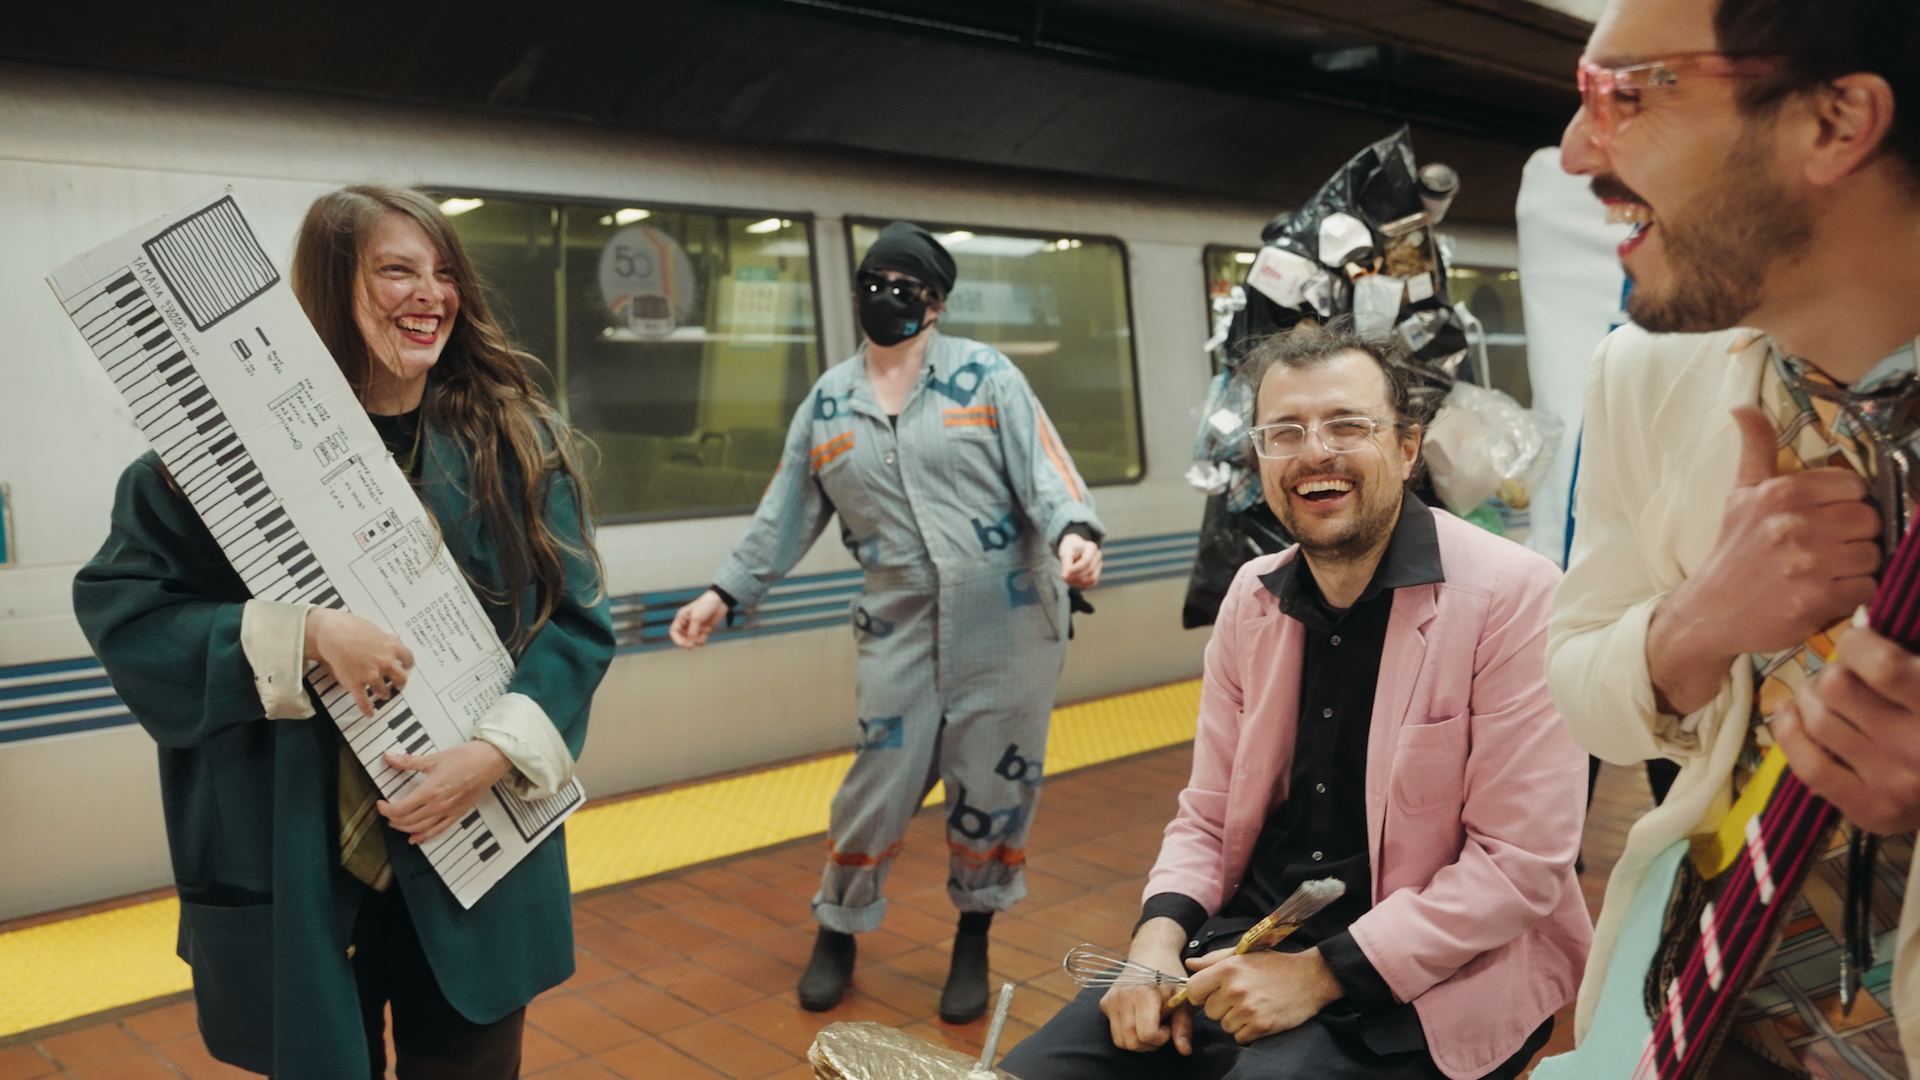 Band members carrying a papier-mache keyboard and electric bass smile at each other next to a drummer holding a whisk on a subway station platform, with a dancer standing nearby next to a train.